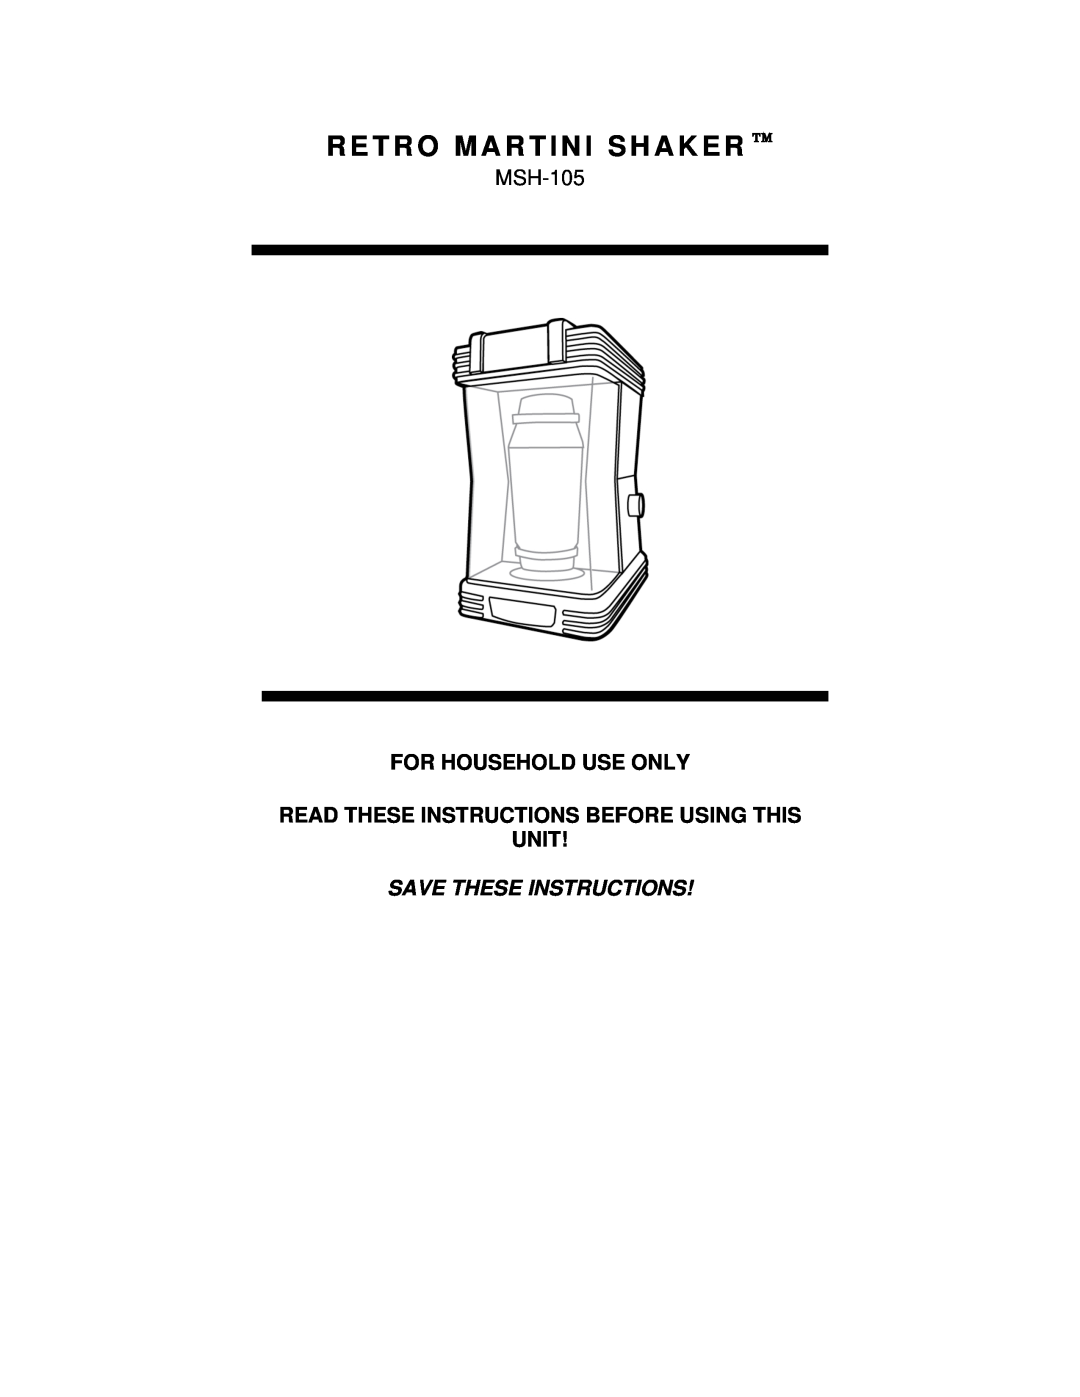 Nostalgia Electrics MSH-105 manual For Household Use Only, Read These Instructions Before Using This Unit 